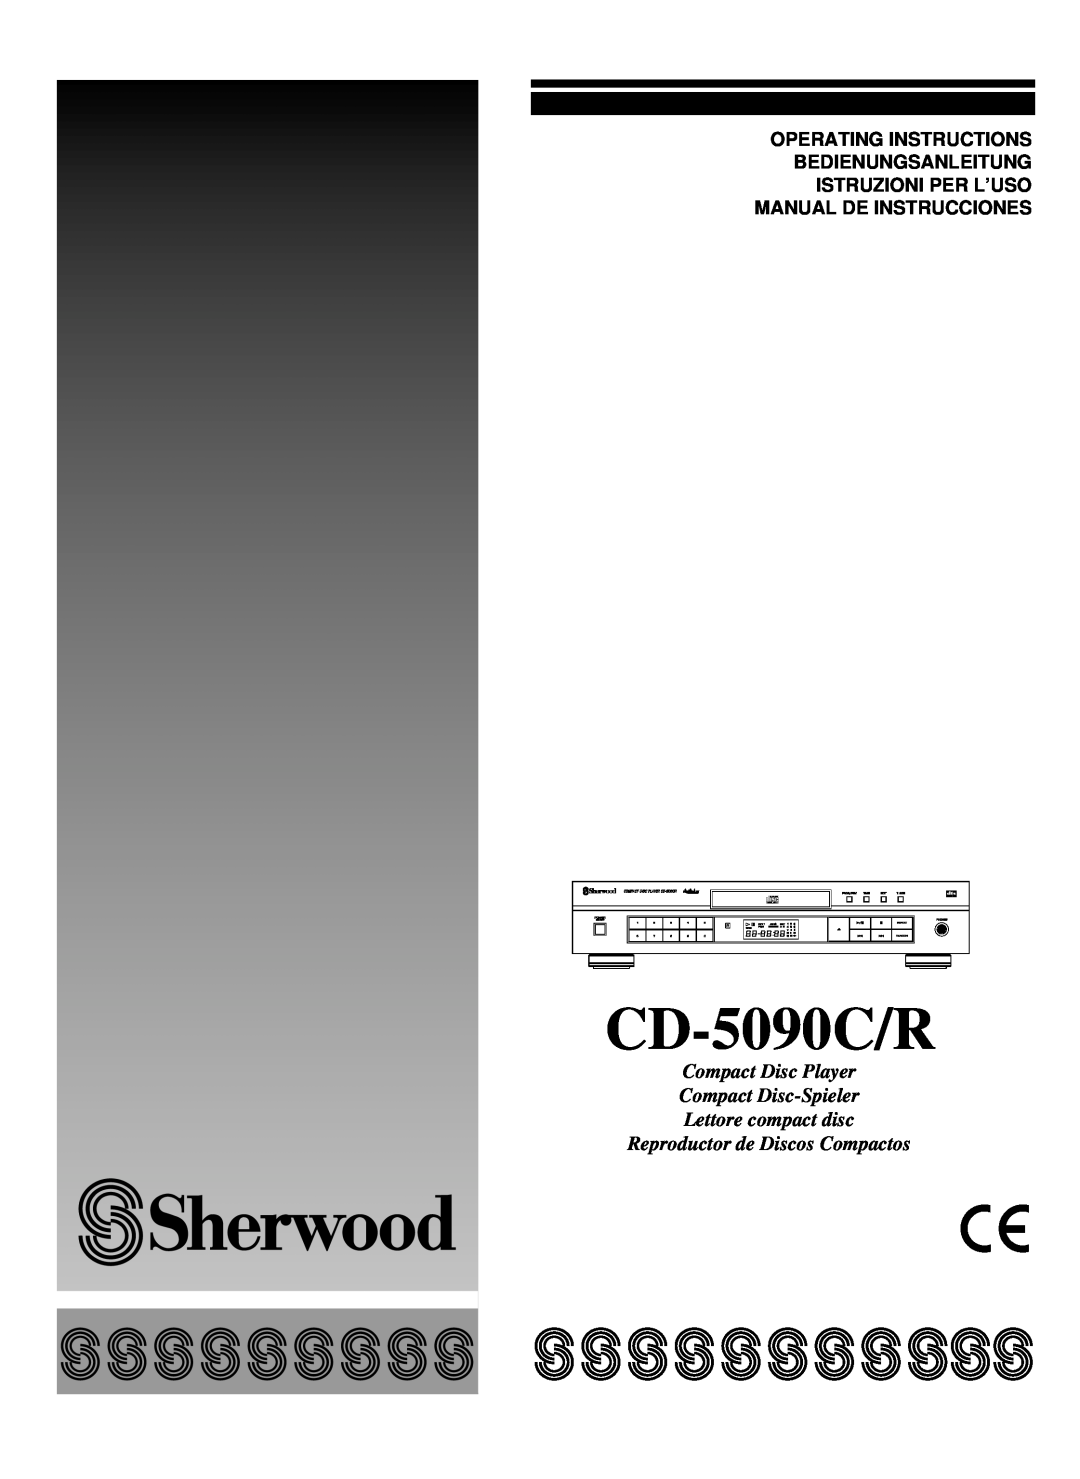 Sherwood CD-5090C/R operating instructions Operating Instructions Bedienungsanleitung, Lettore compact disc 